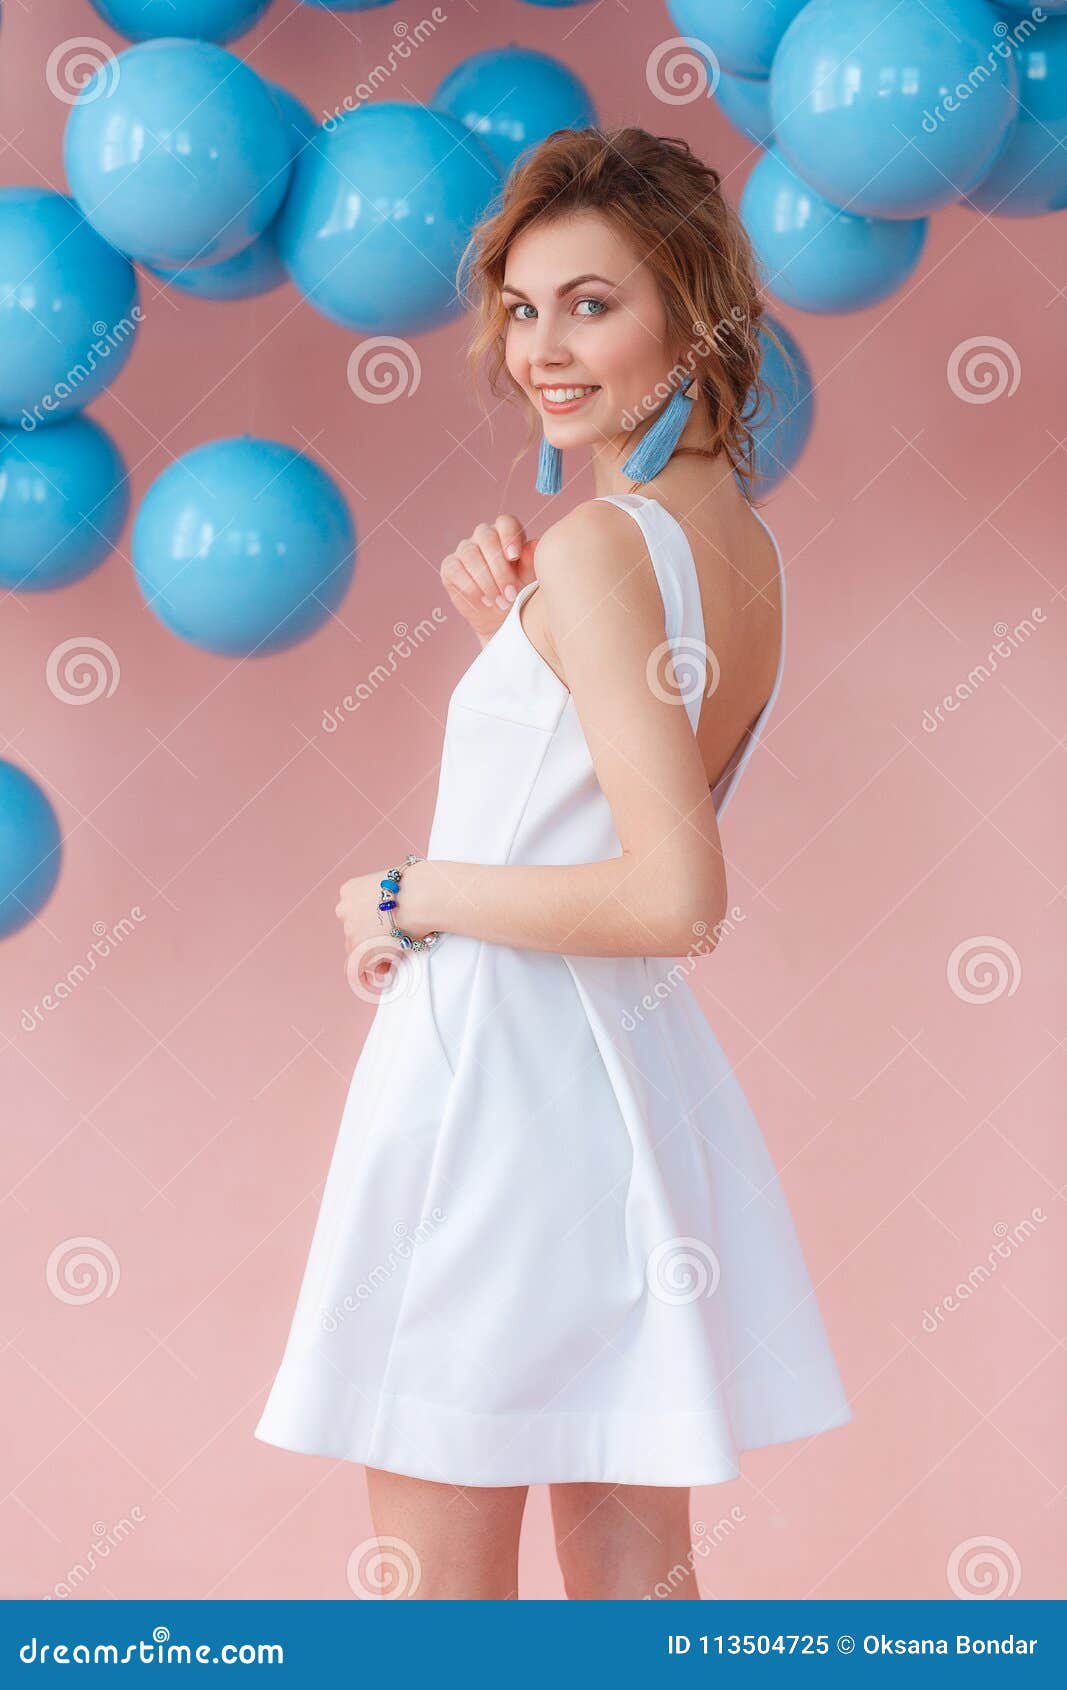 Young Woman in White Cocktail Dress Posing on Pink Wall Background with  Blue Balls Hanging Stock Image - Image of clothes, female: 113504725